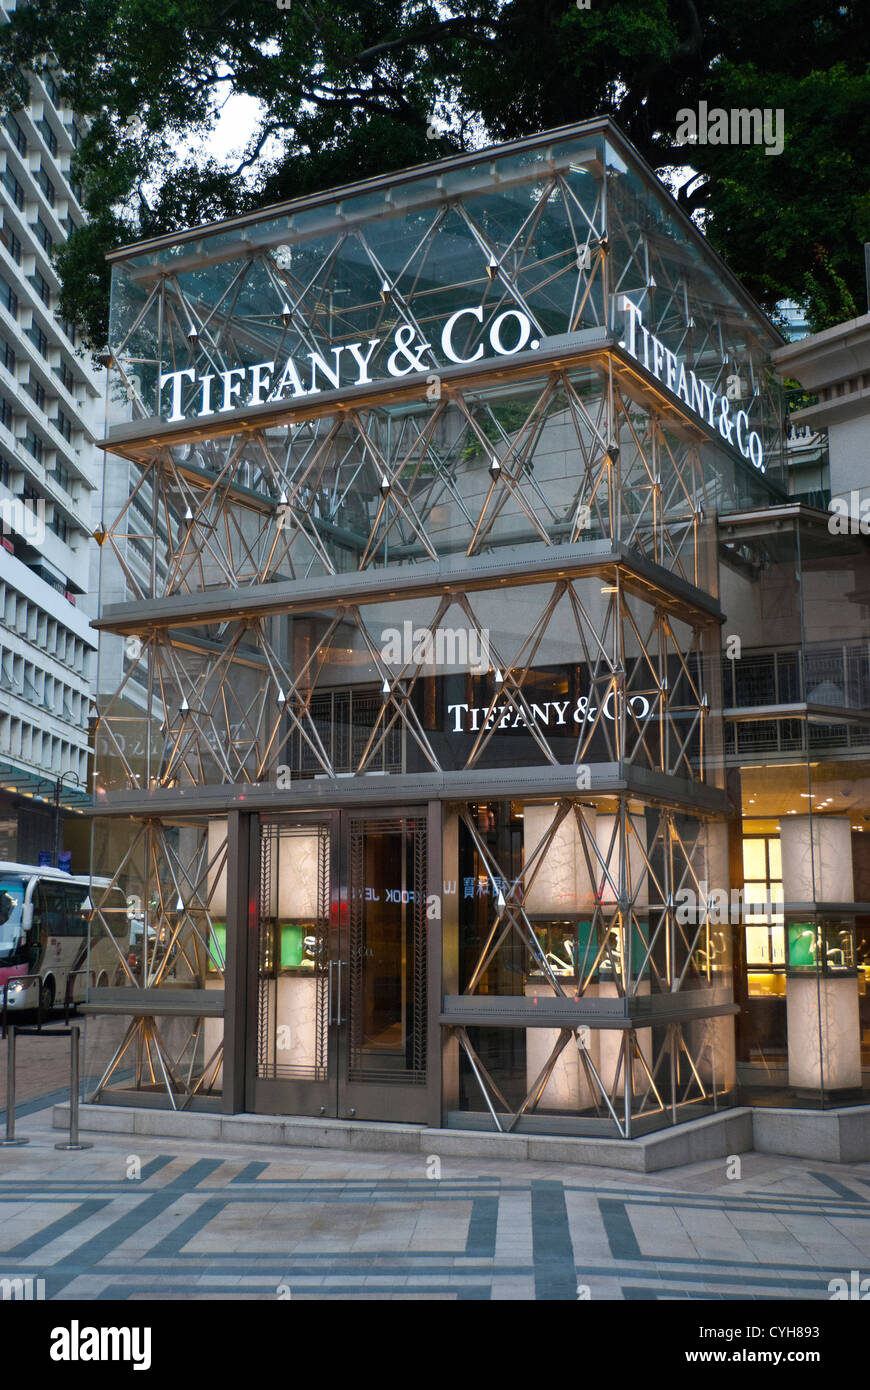 Tiffany & Co, 1881 Heritage, part of the Redevelopment of the old Hong Kong Marine Police Headquarters, Kowloon, Hong Kong, Stock Photo